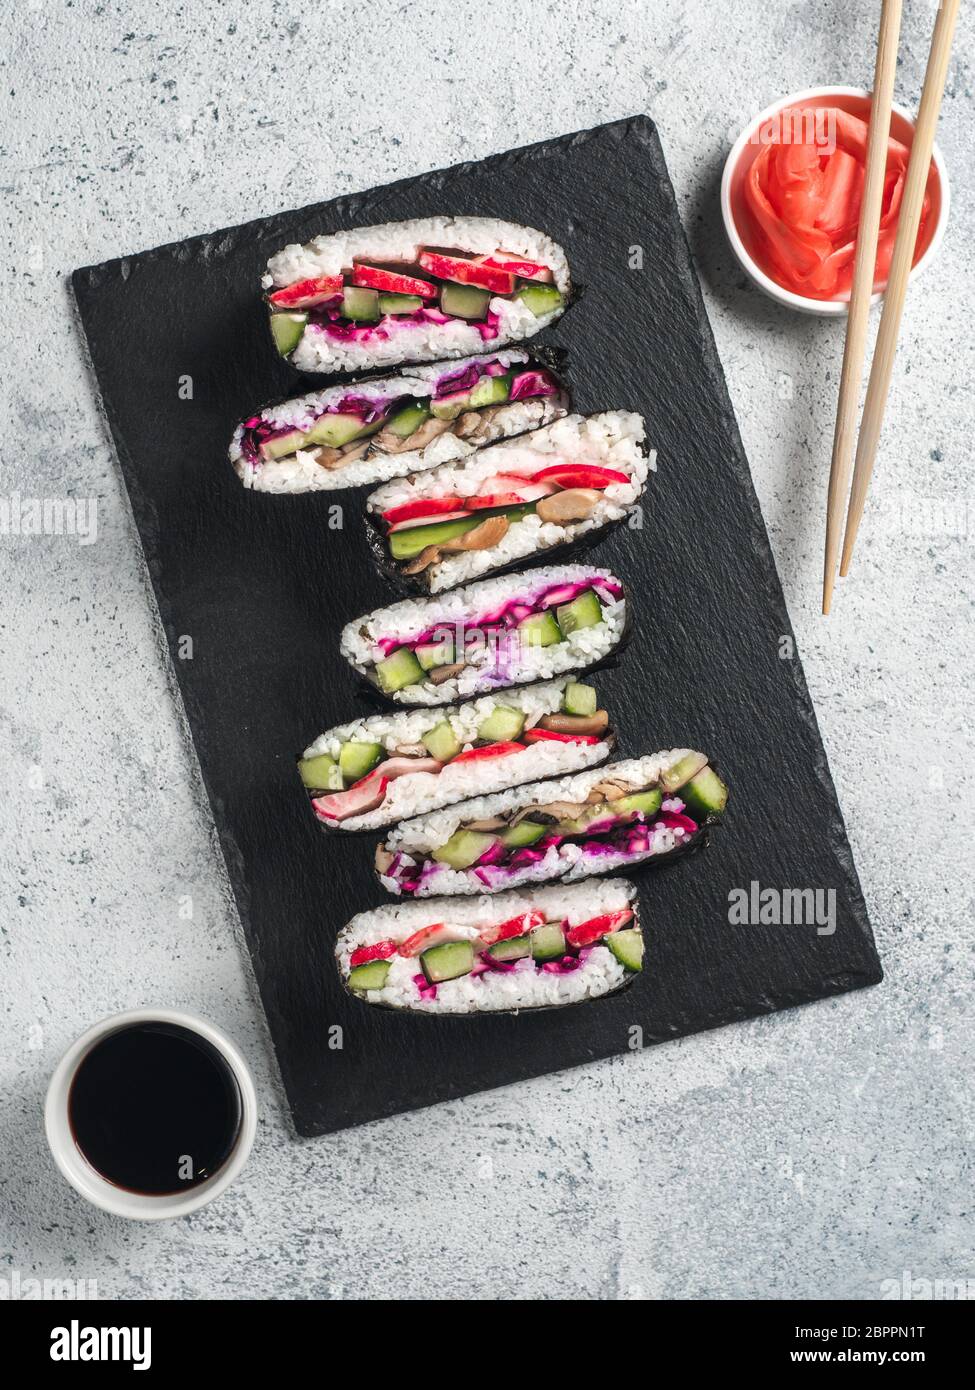 Vegan sushi sandwich onigirazu with mushrooms and vegetables. Healthy dinner recipe and idea. Colorful japan sandwich onigirazu with red cabbage,radis Stock Photo